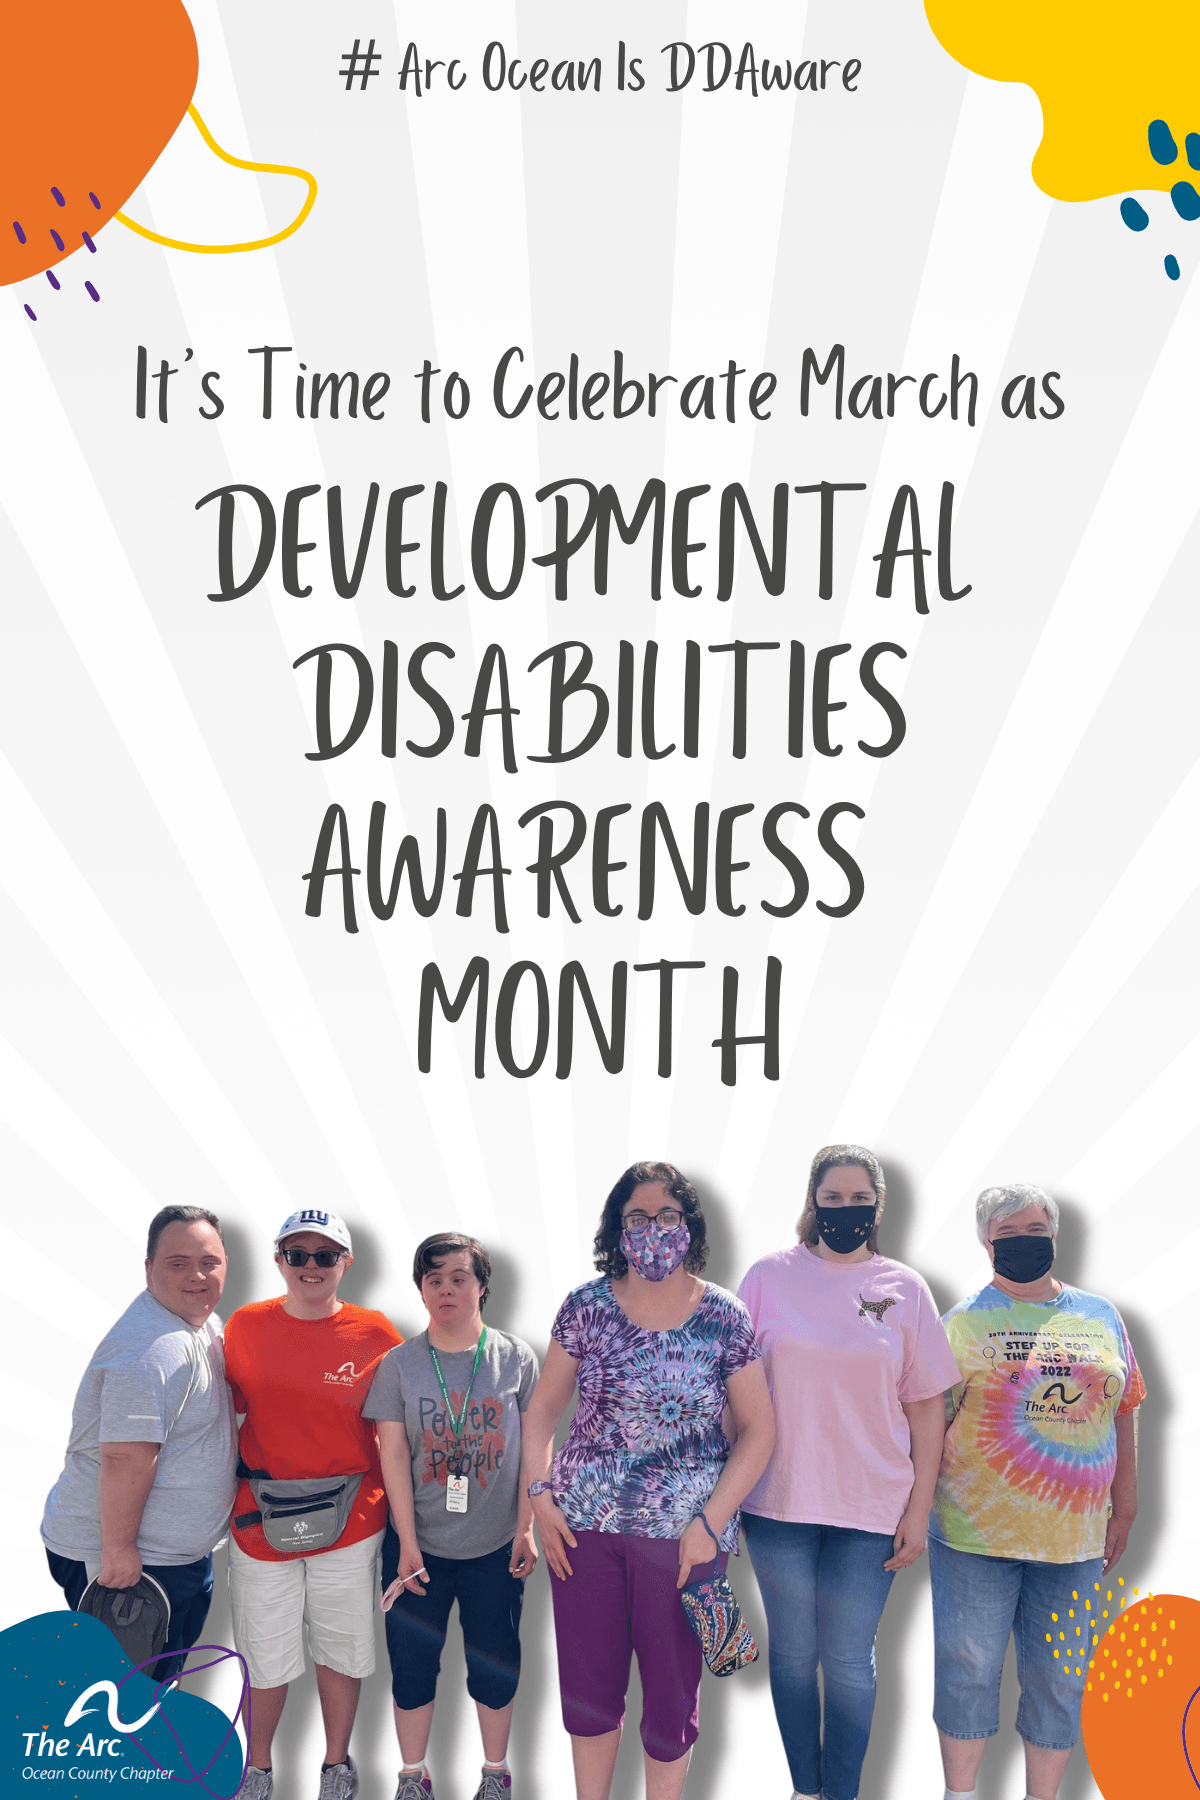 Group photo with text saying "developmental disabilities awareness month" 